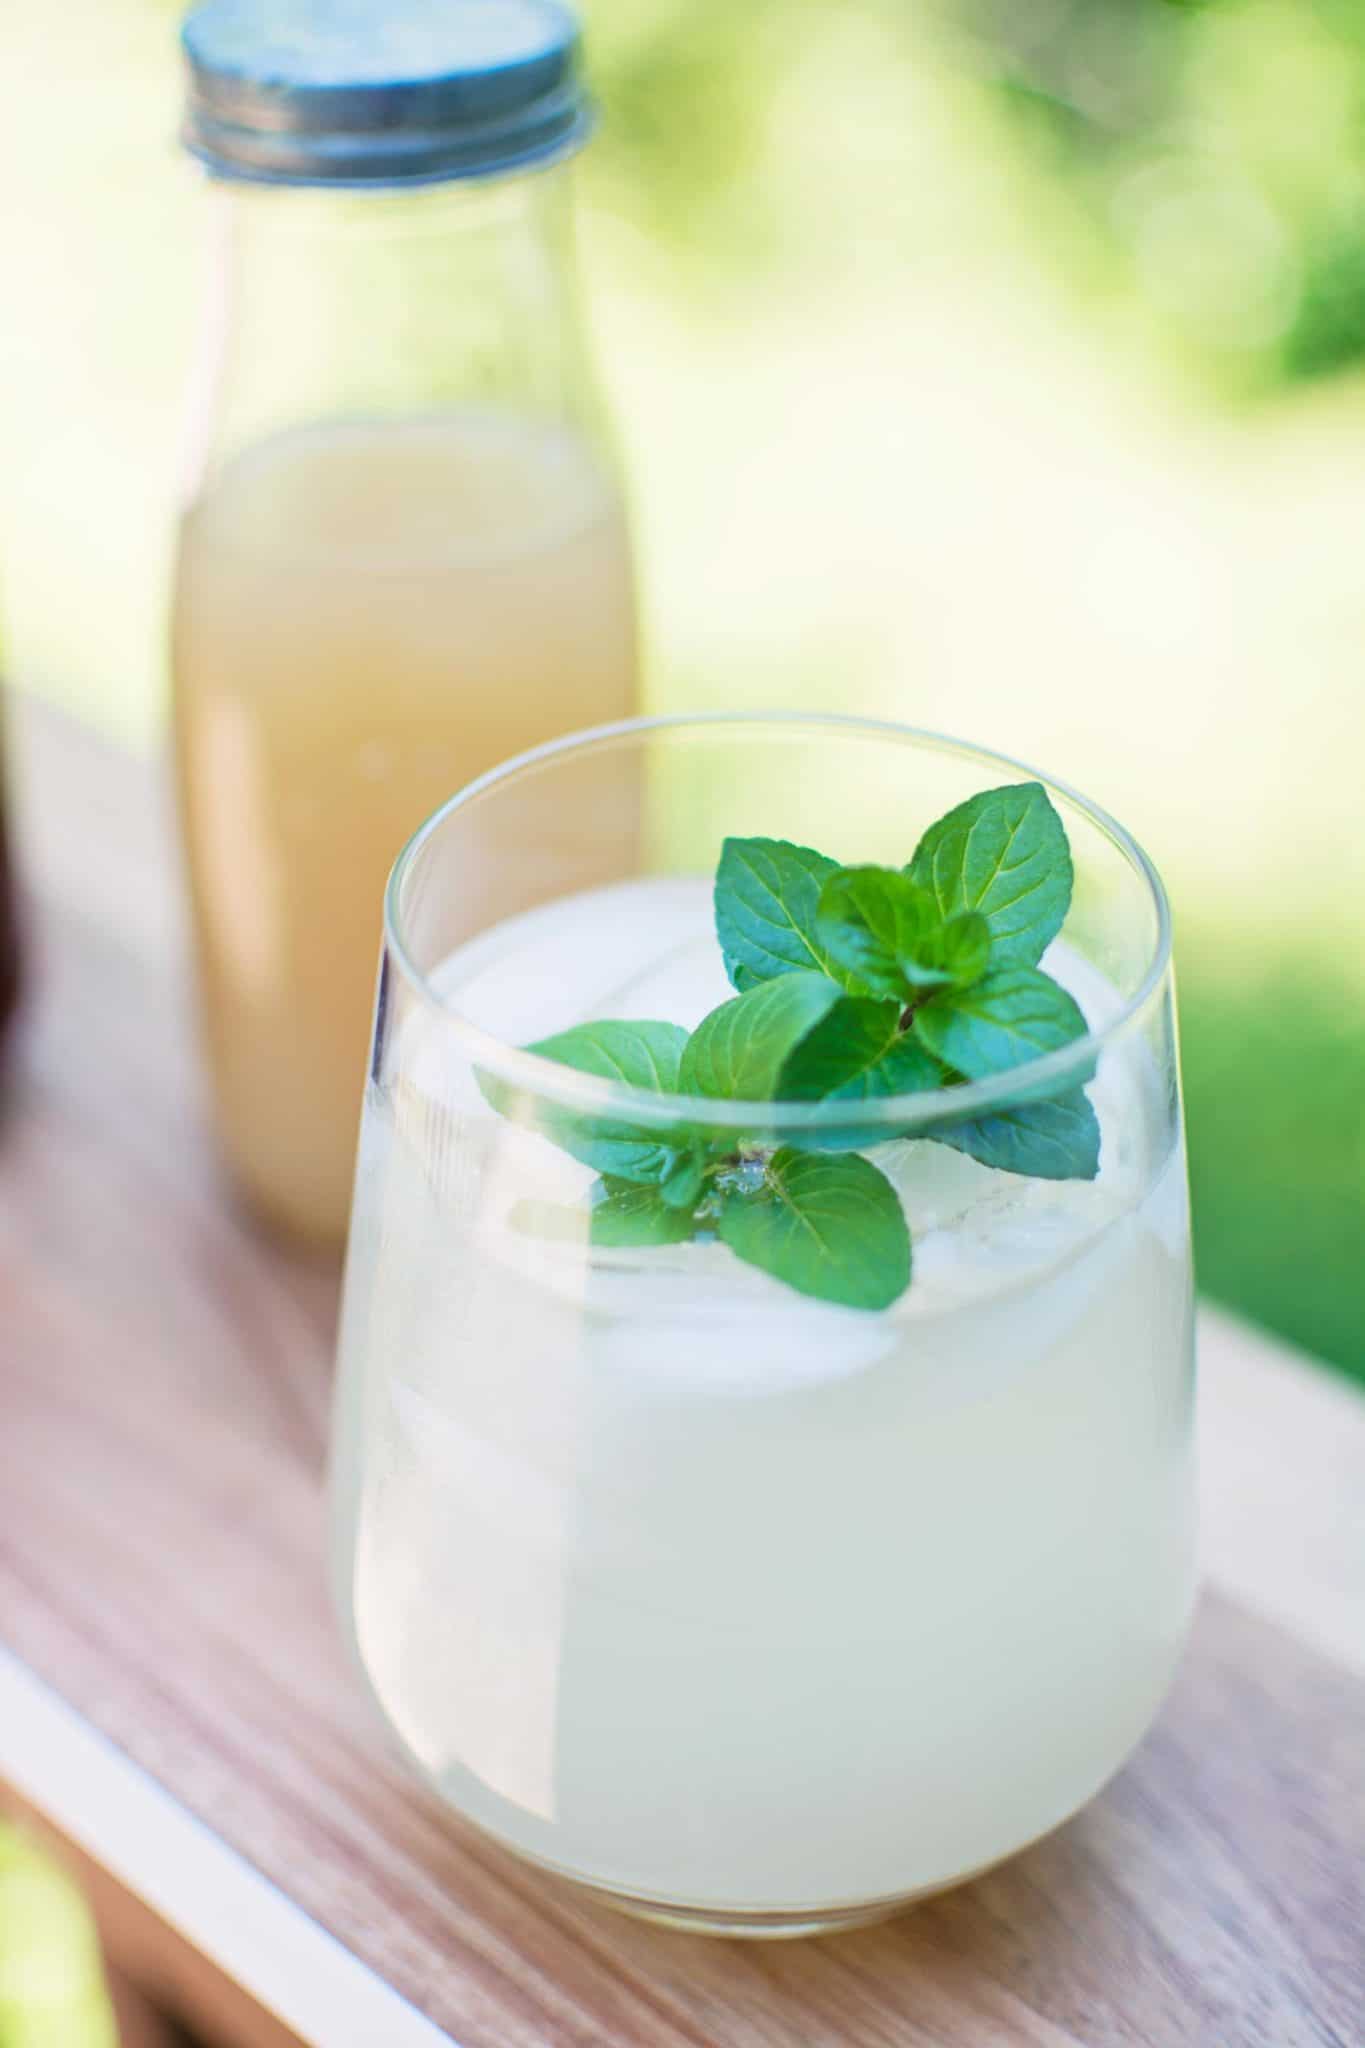 Ice cold ginger beer recipe using a basic flavored syrup to sweeten it up